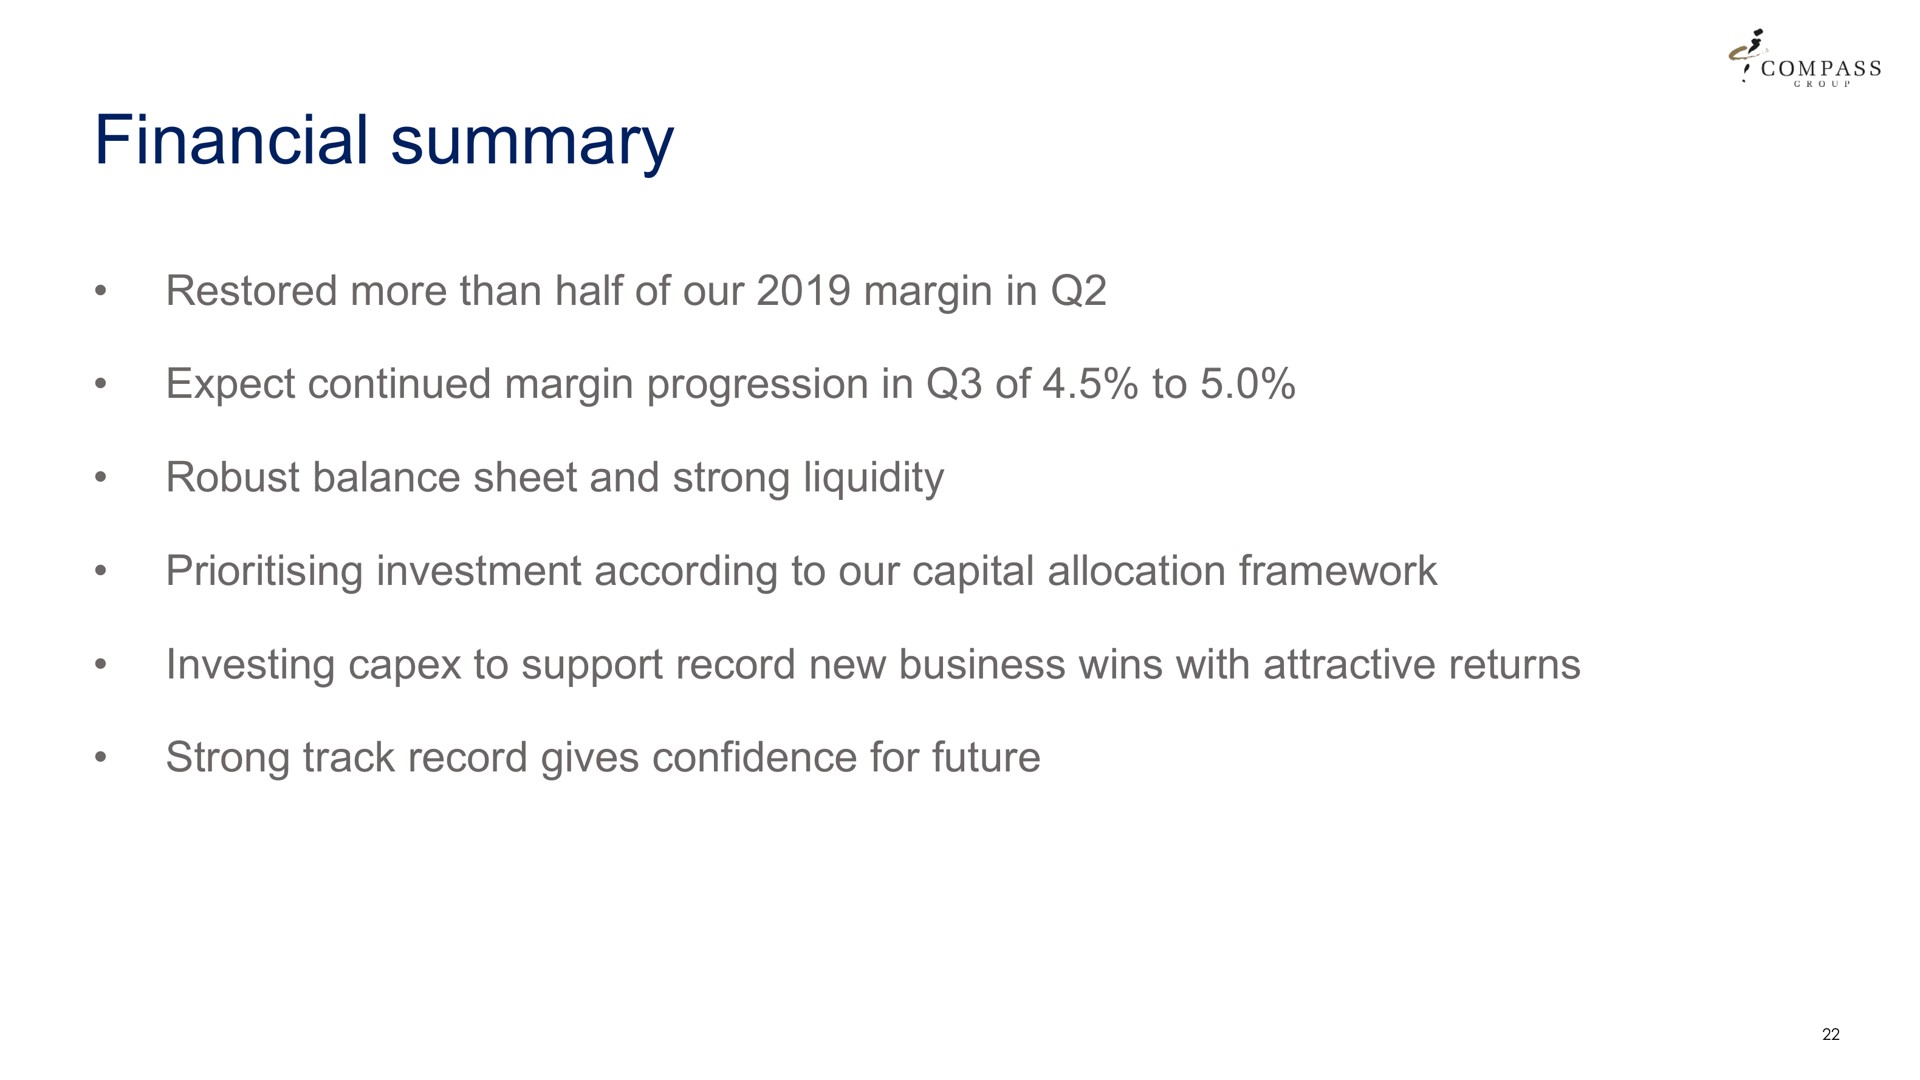 financial summary restored more than half of our margin in expect continued margin progression in of to robust balance sheet and strong liquidity investment according to our capital allocation framework investing to support record new business wins with attractive returns strong track record gives confidence for future | Compass Group